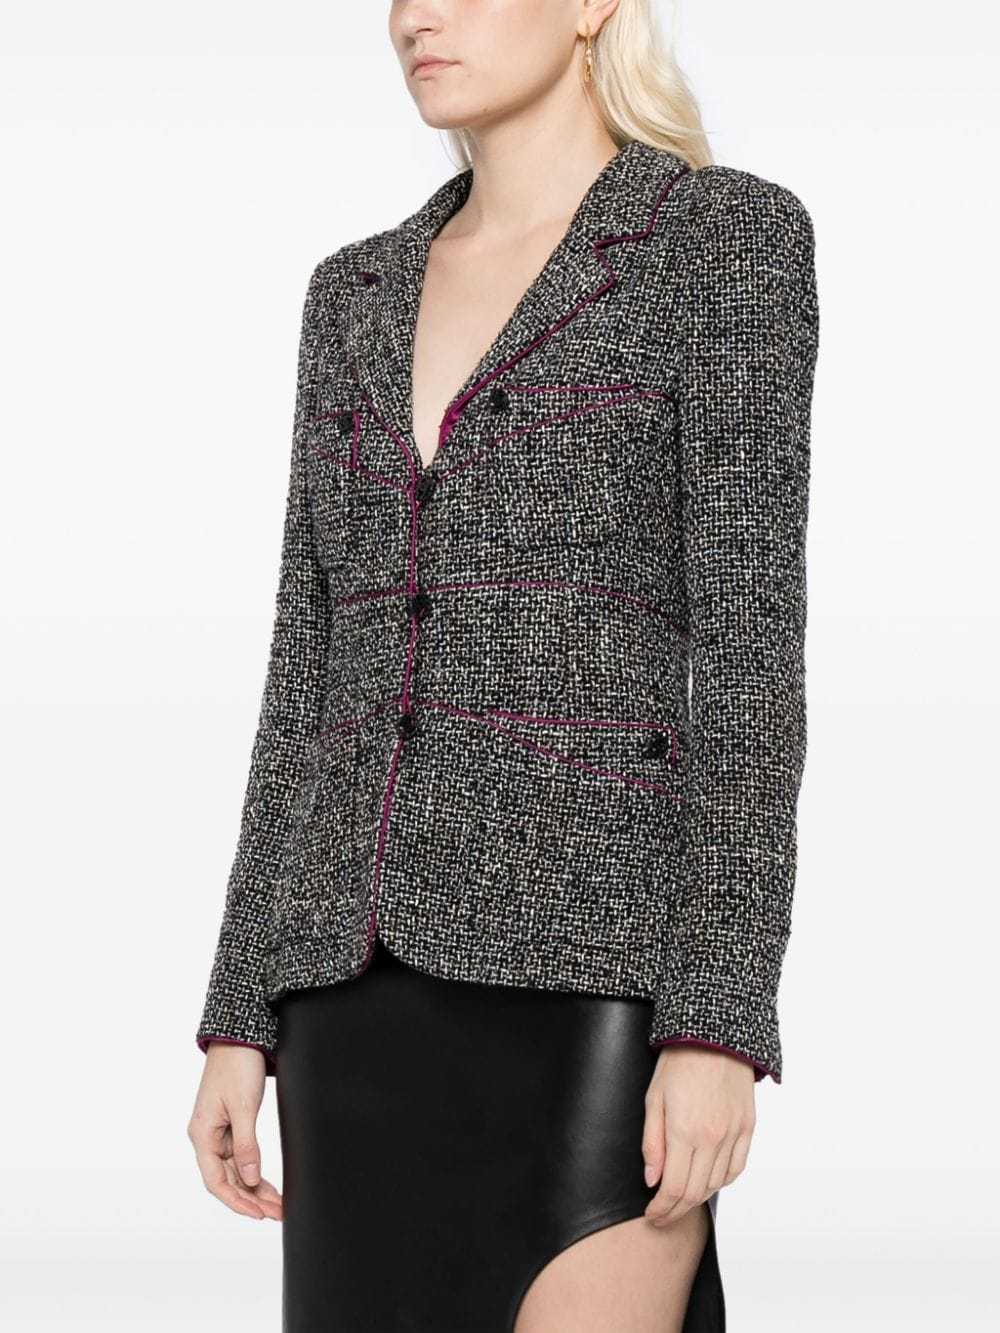 CHANEL Pre-Owned 2003 single-breasted tweed jacke… - image 3